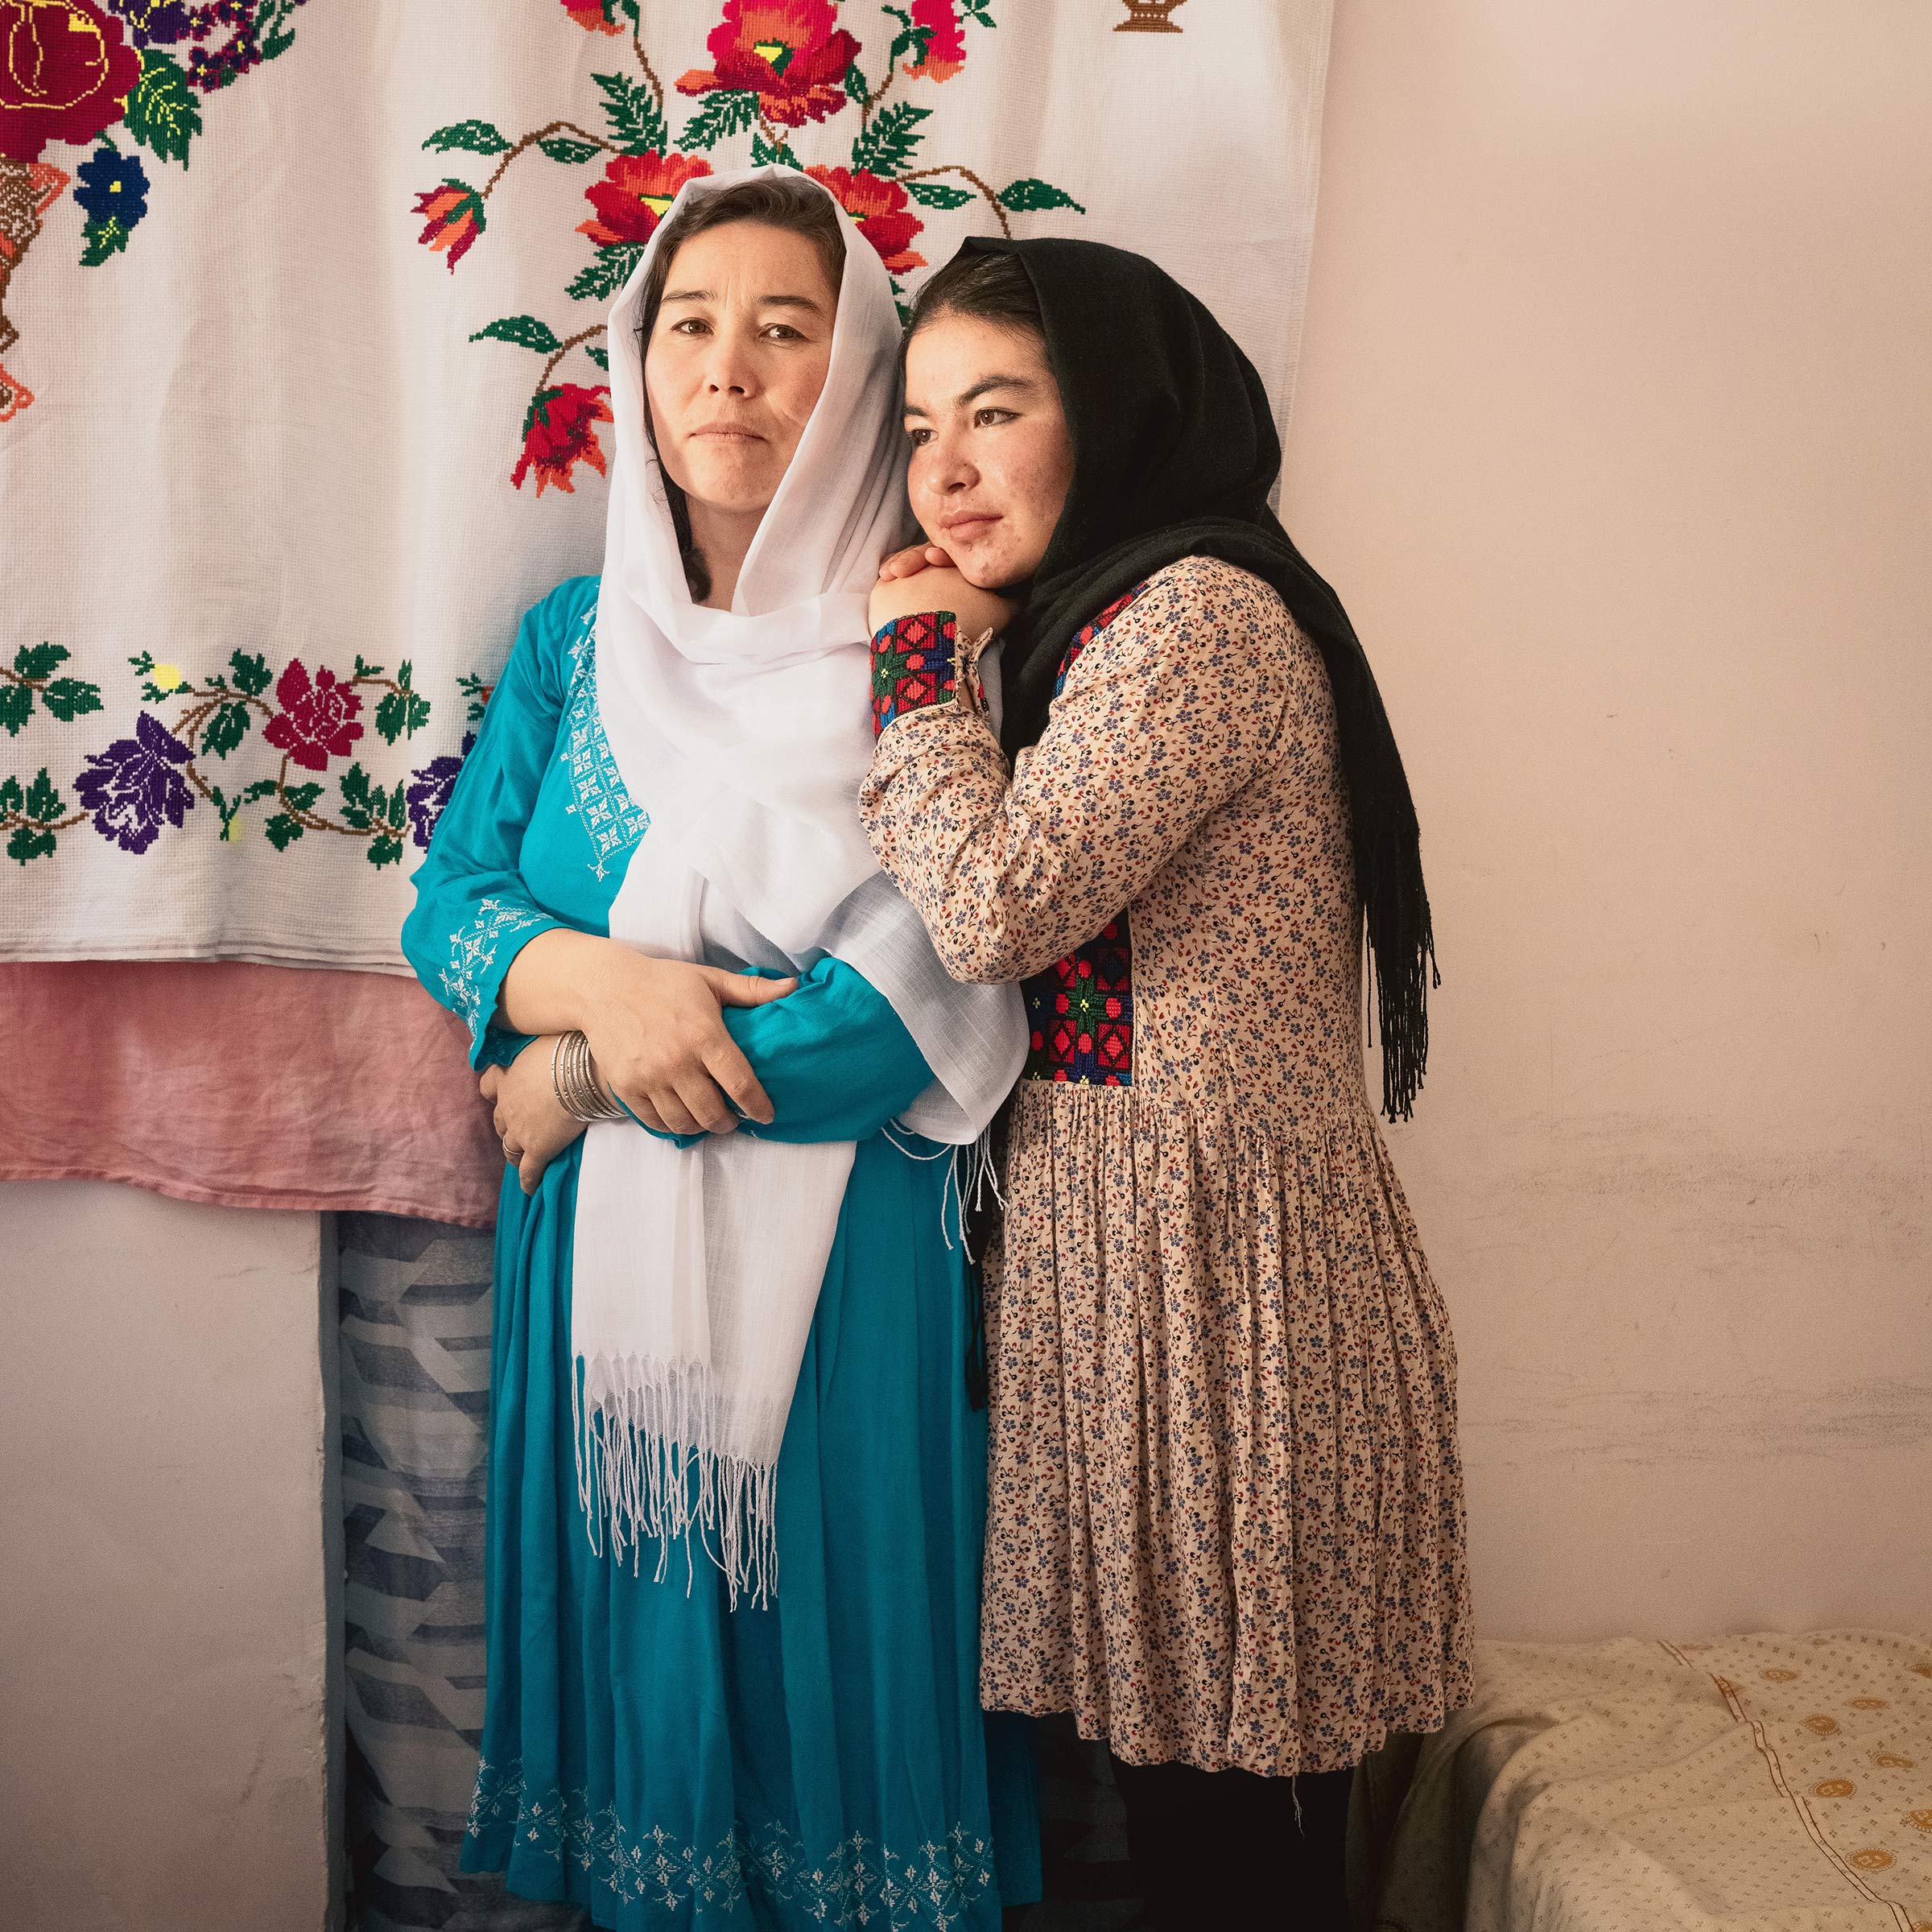 <strong>Biology teacher Najiba Ebrahimi and her daughter, Azada, in São Paulo, Brazil, on July 10.</strong> "<a href="https://time.com/afghan-women-kabul-fall-anniversary/">Far From Home: One year after the fall of Kabul, Afghan women are attempting to build new lives abroad,</a>" August 22 issue. (Luisa Dörr for TIME)